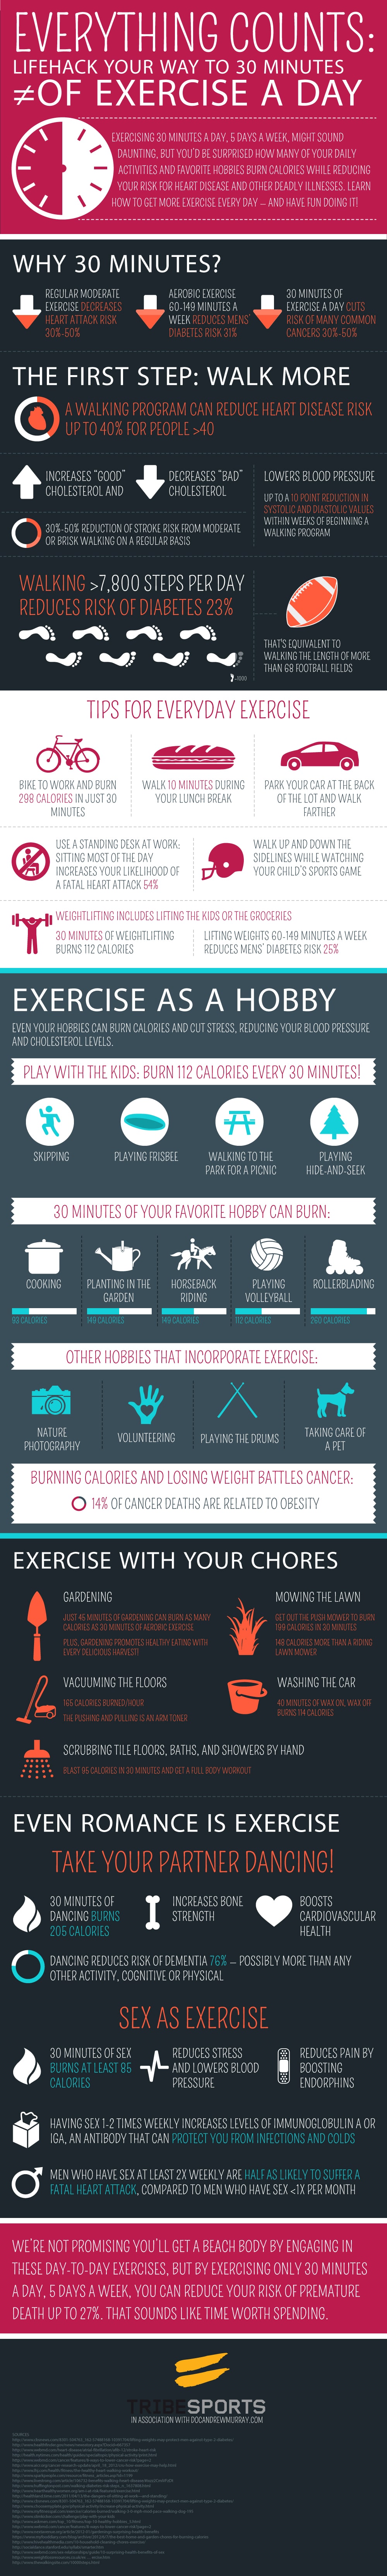 How To Lifehack Your Exercise Into Every Day [Infographic]